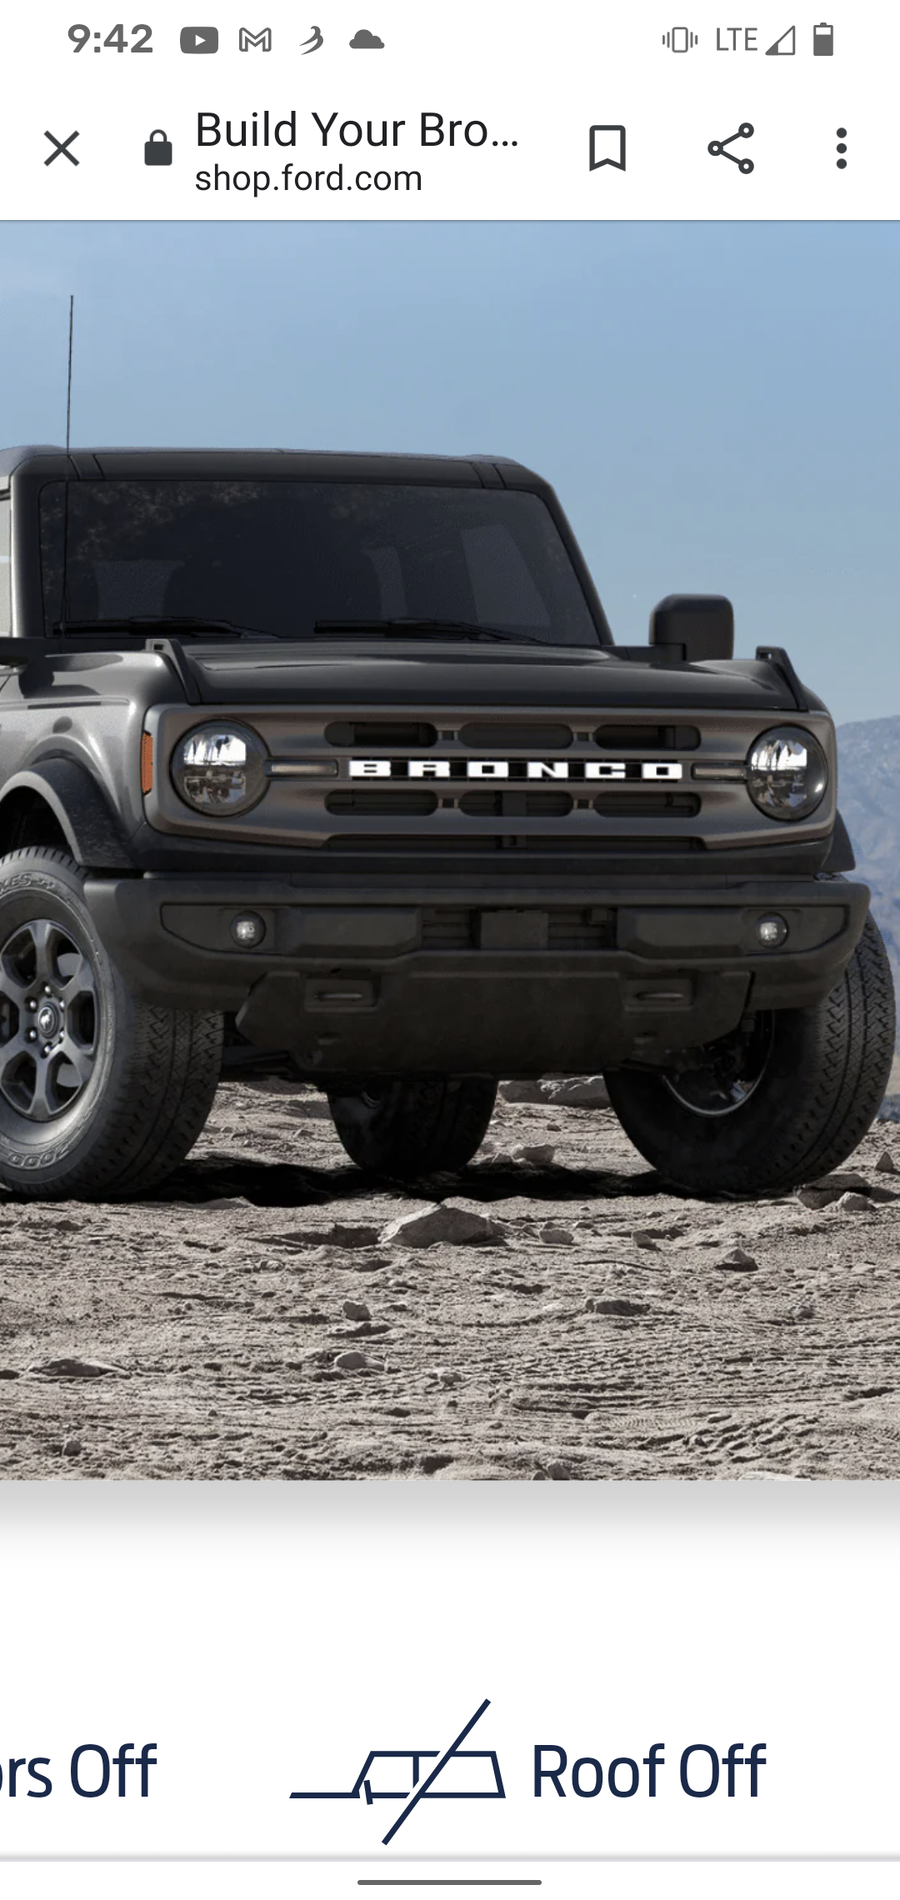 Ford Bronco Name that grille Screenshot_20210517-094249